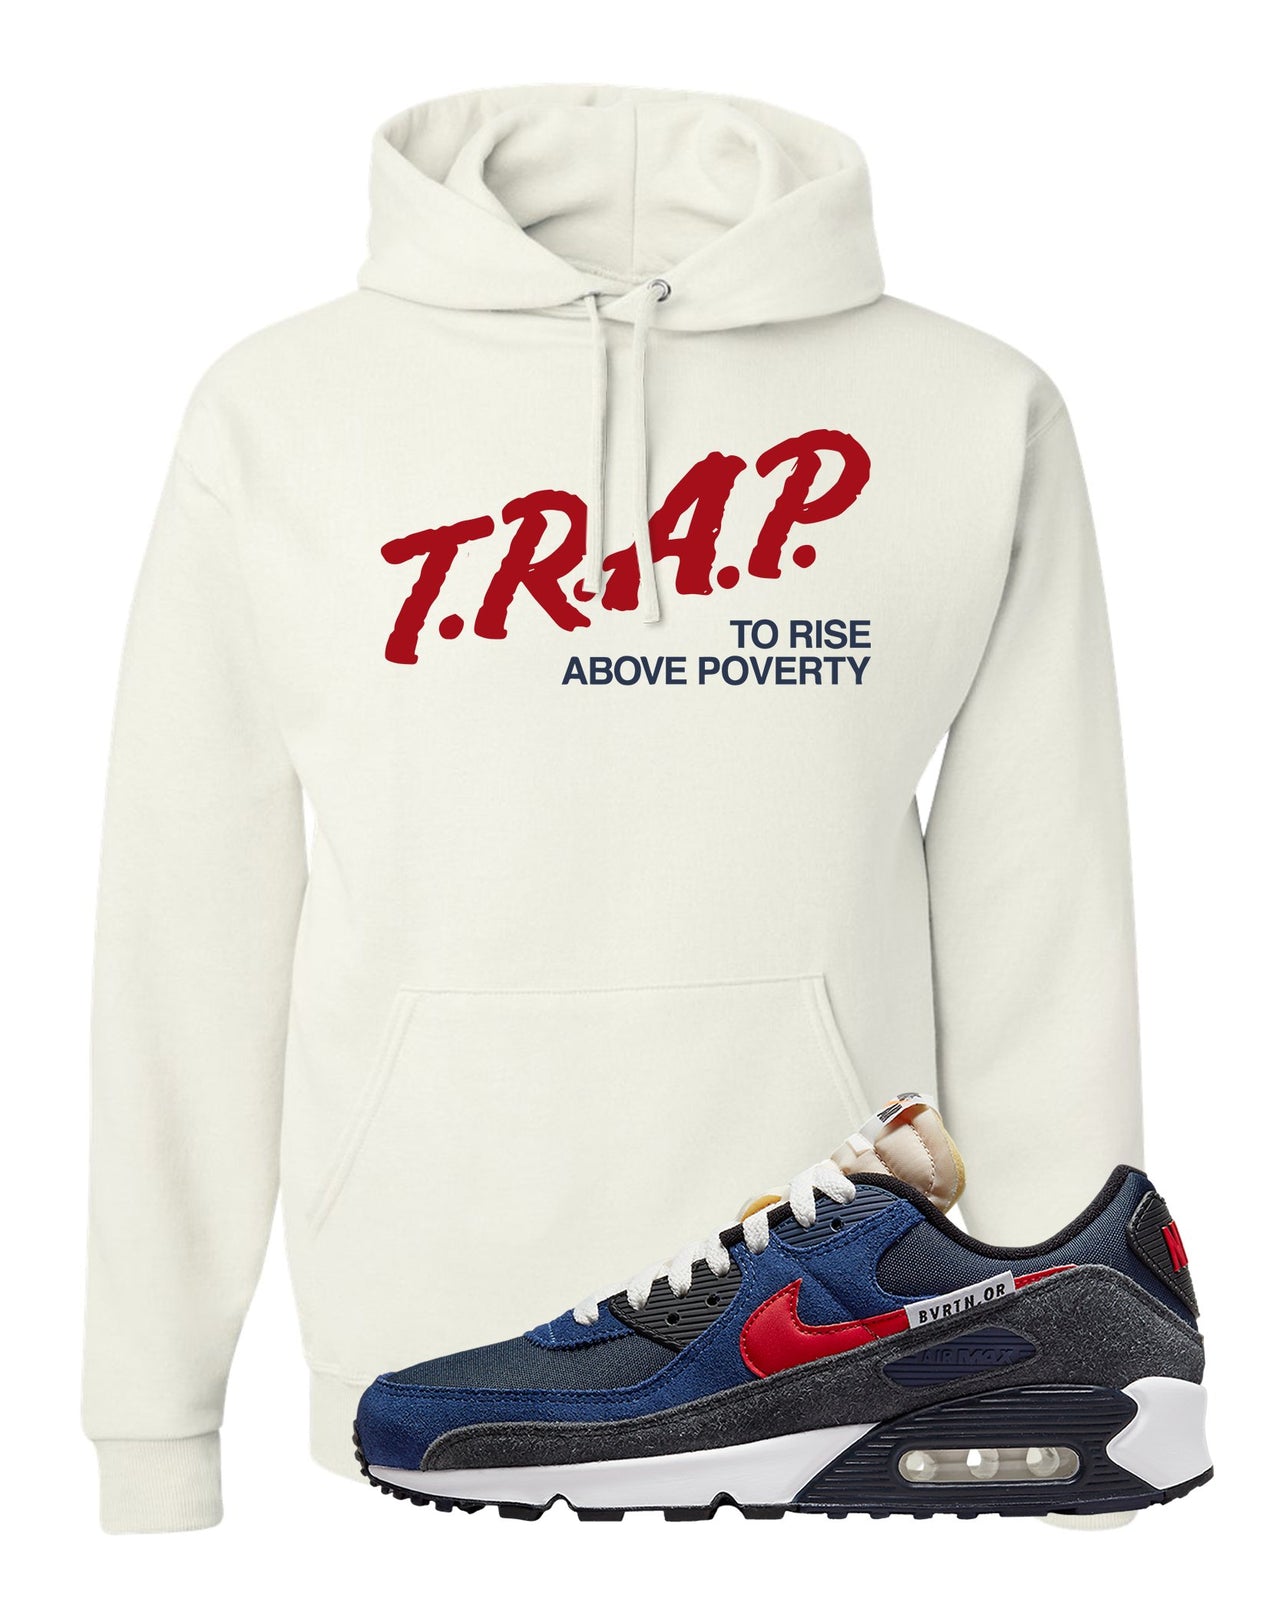 AMRC 90s Hoodie | Trap To Rise Above Poverty, White